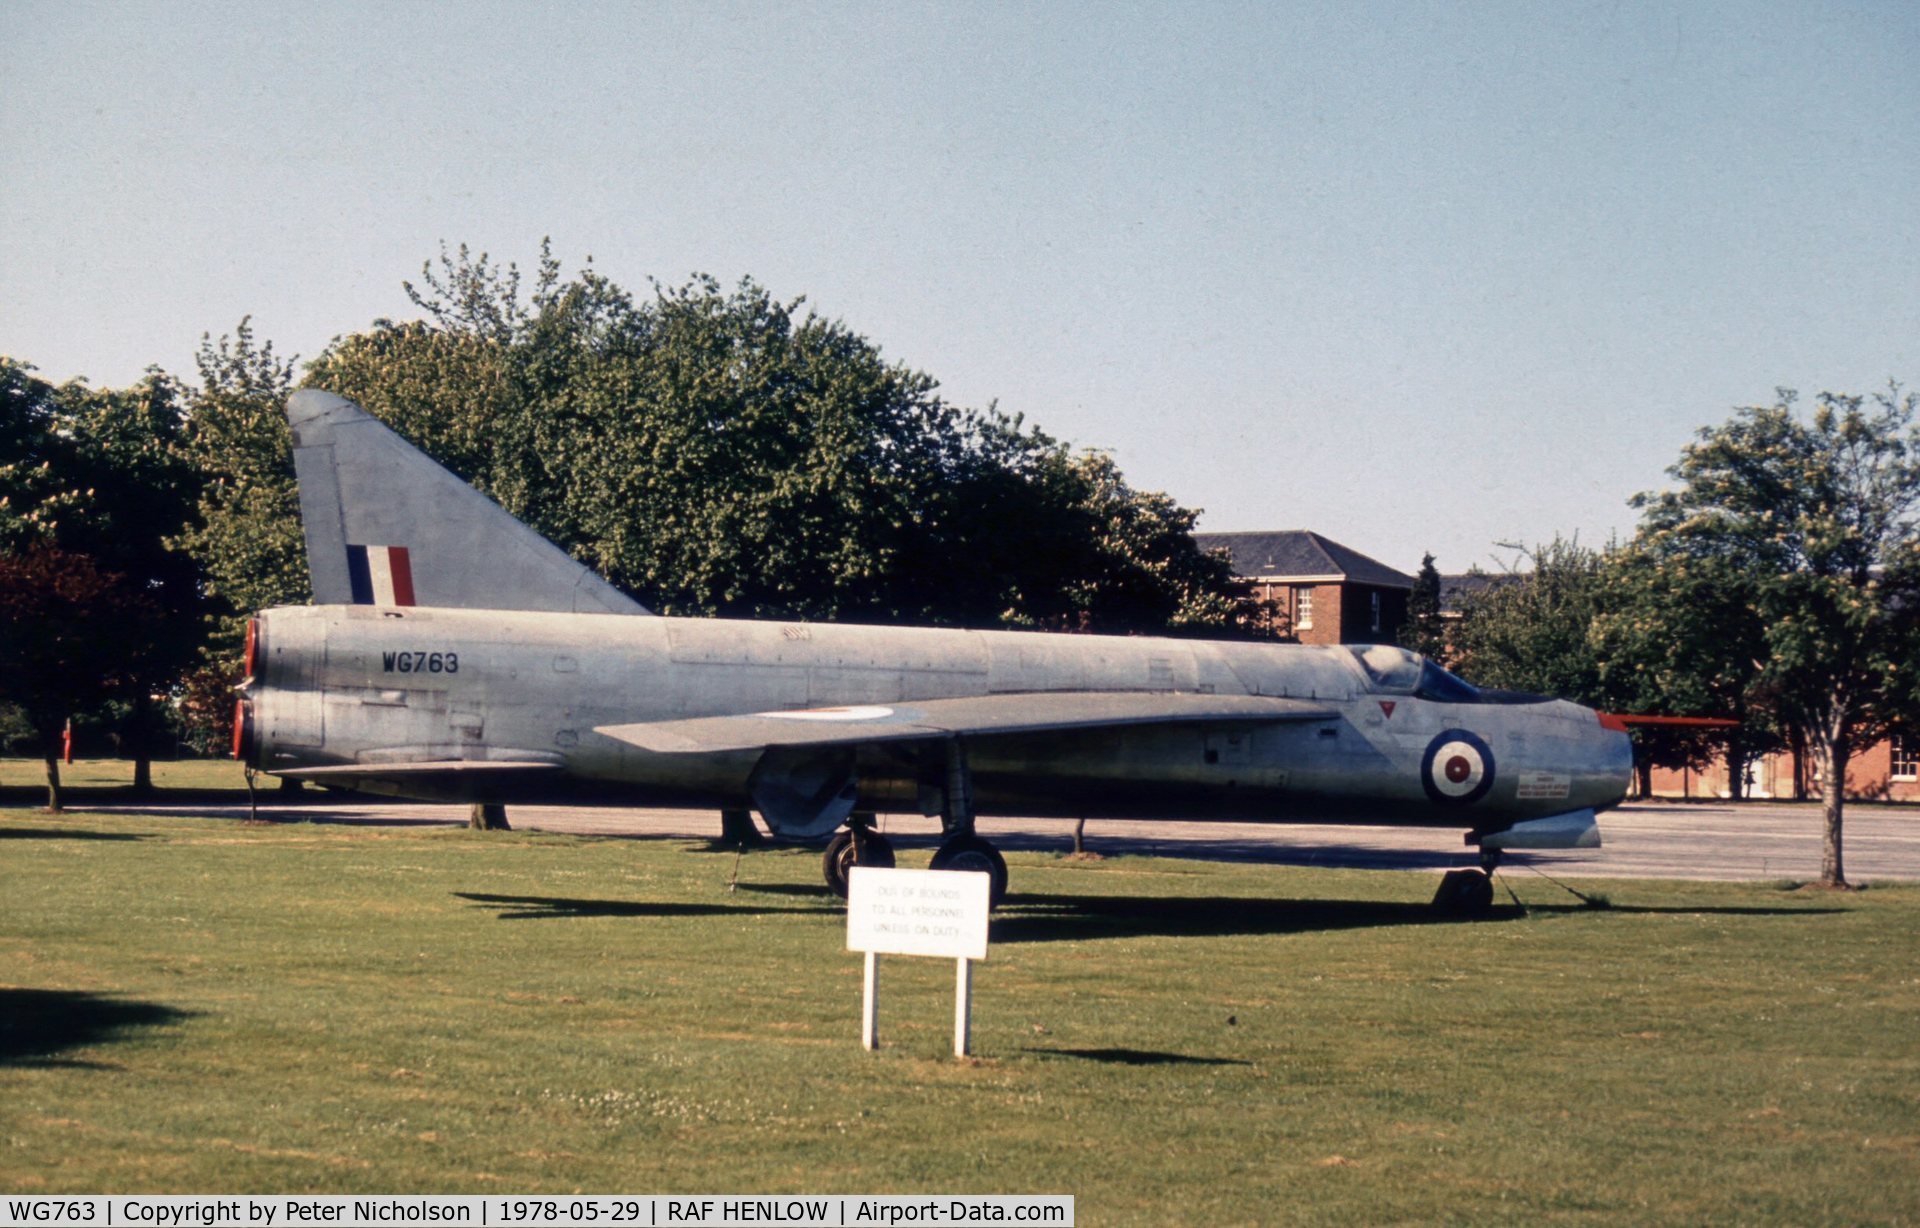 WG763, 1955 English Electric P.1A C/N 95003, English Electric P.1A WG 763 was a gate guardian at RAF Henlow in 1978.